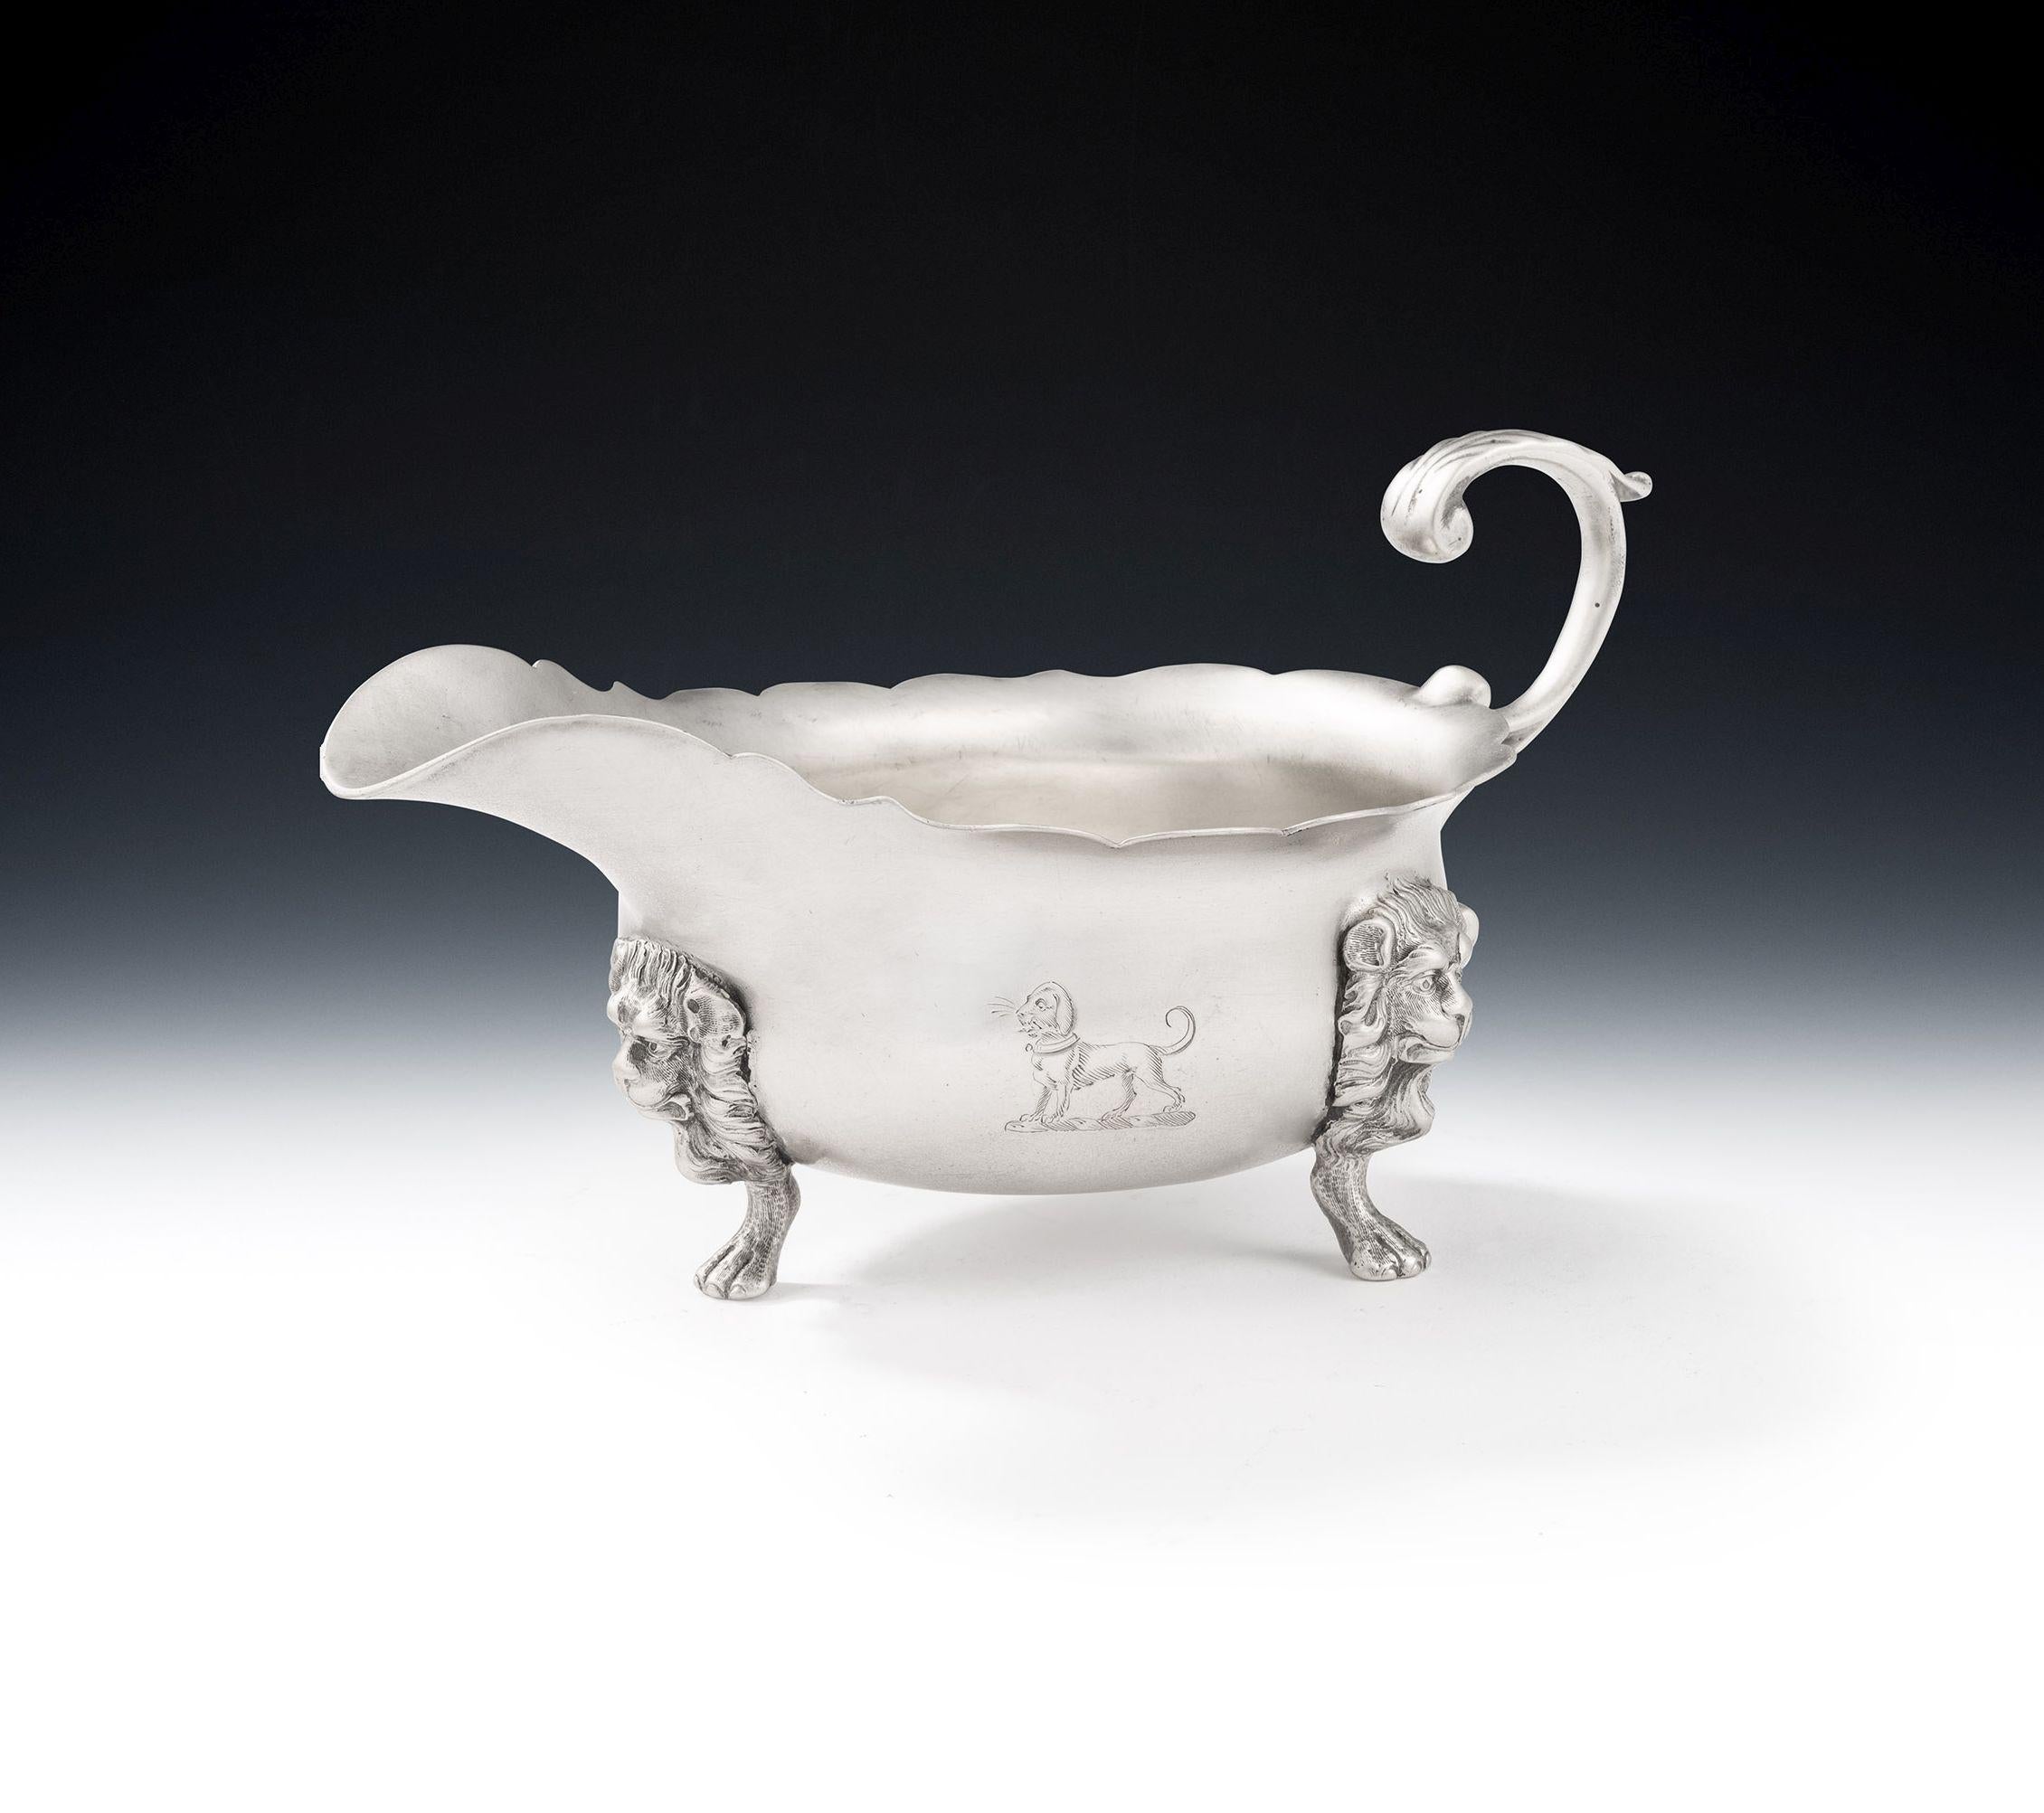 A VERY FINE GEORGE II CREAM BOAT MADE IN LONDON IN 1740 BY JOSEPH SANDERS.

The Creamboat has an elongated, shallow, form which rises to an everted and shaped rim. The main body stands on three very finely detailed paw feet with majestic lion mask